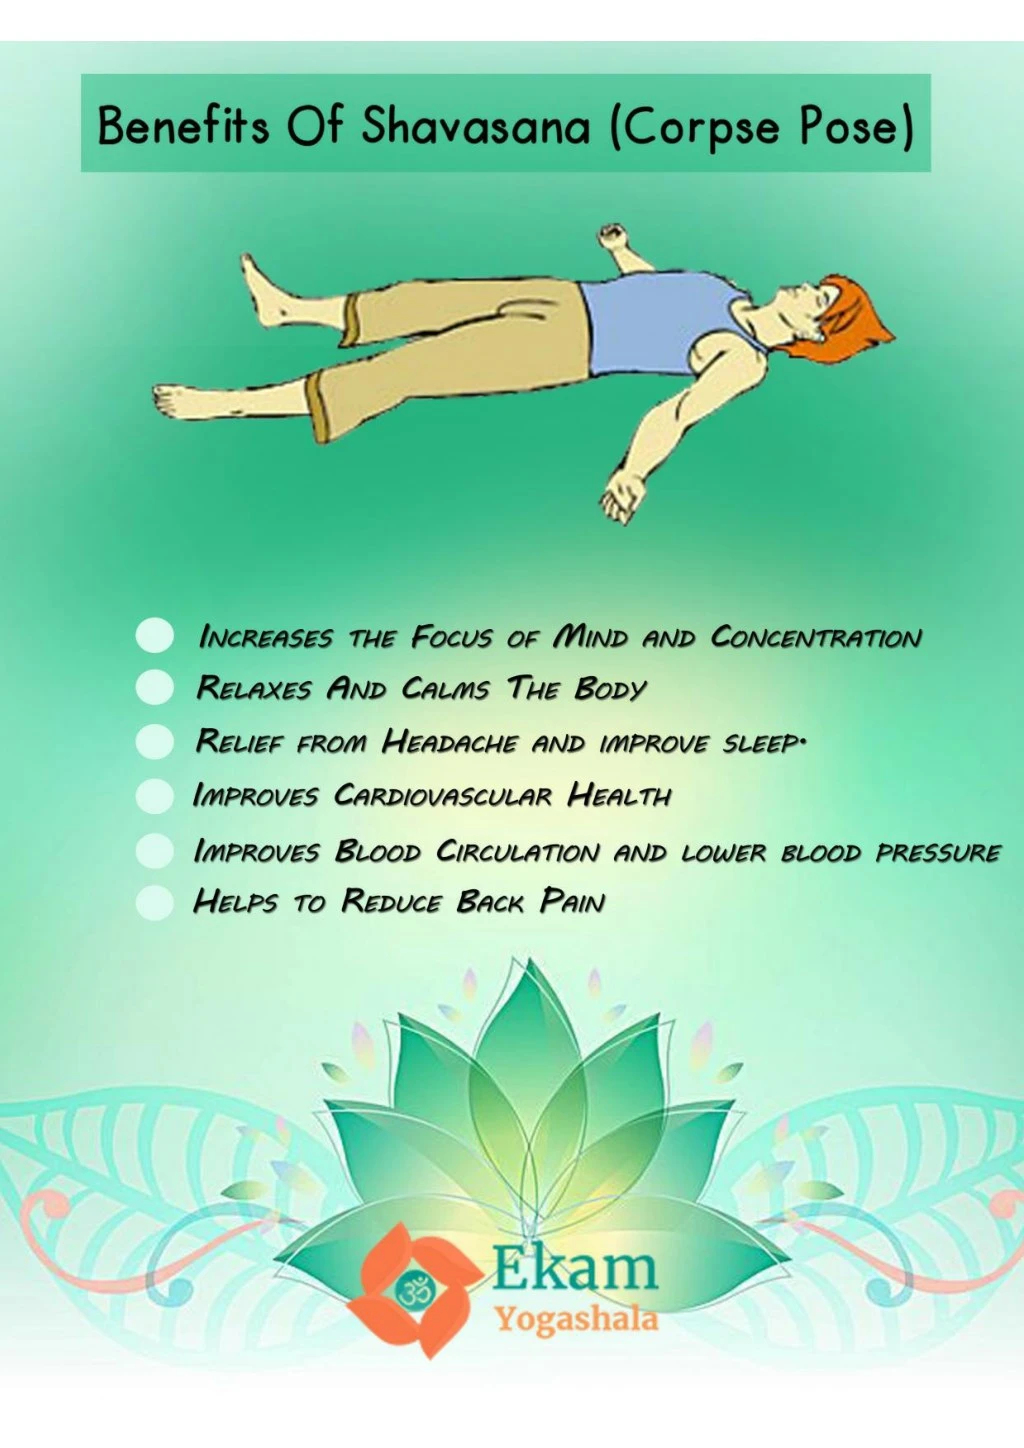 What Savasana can do for your health? - Lifeandtrendz